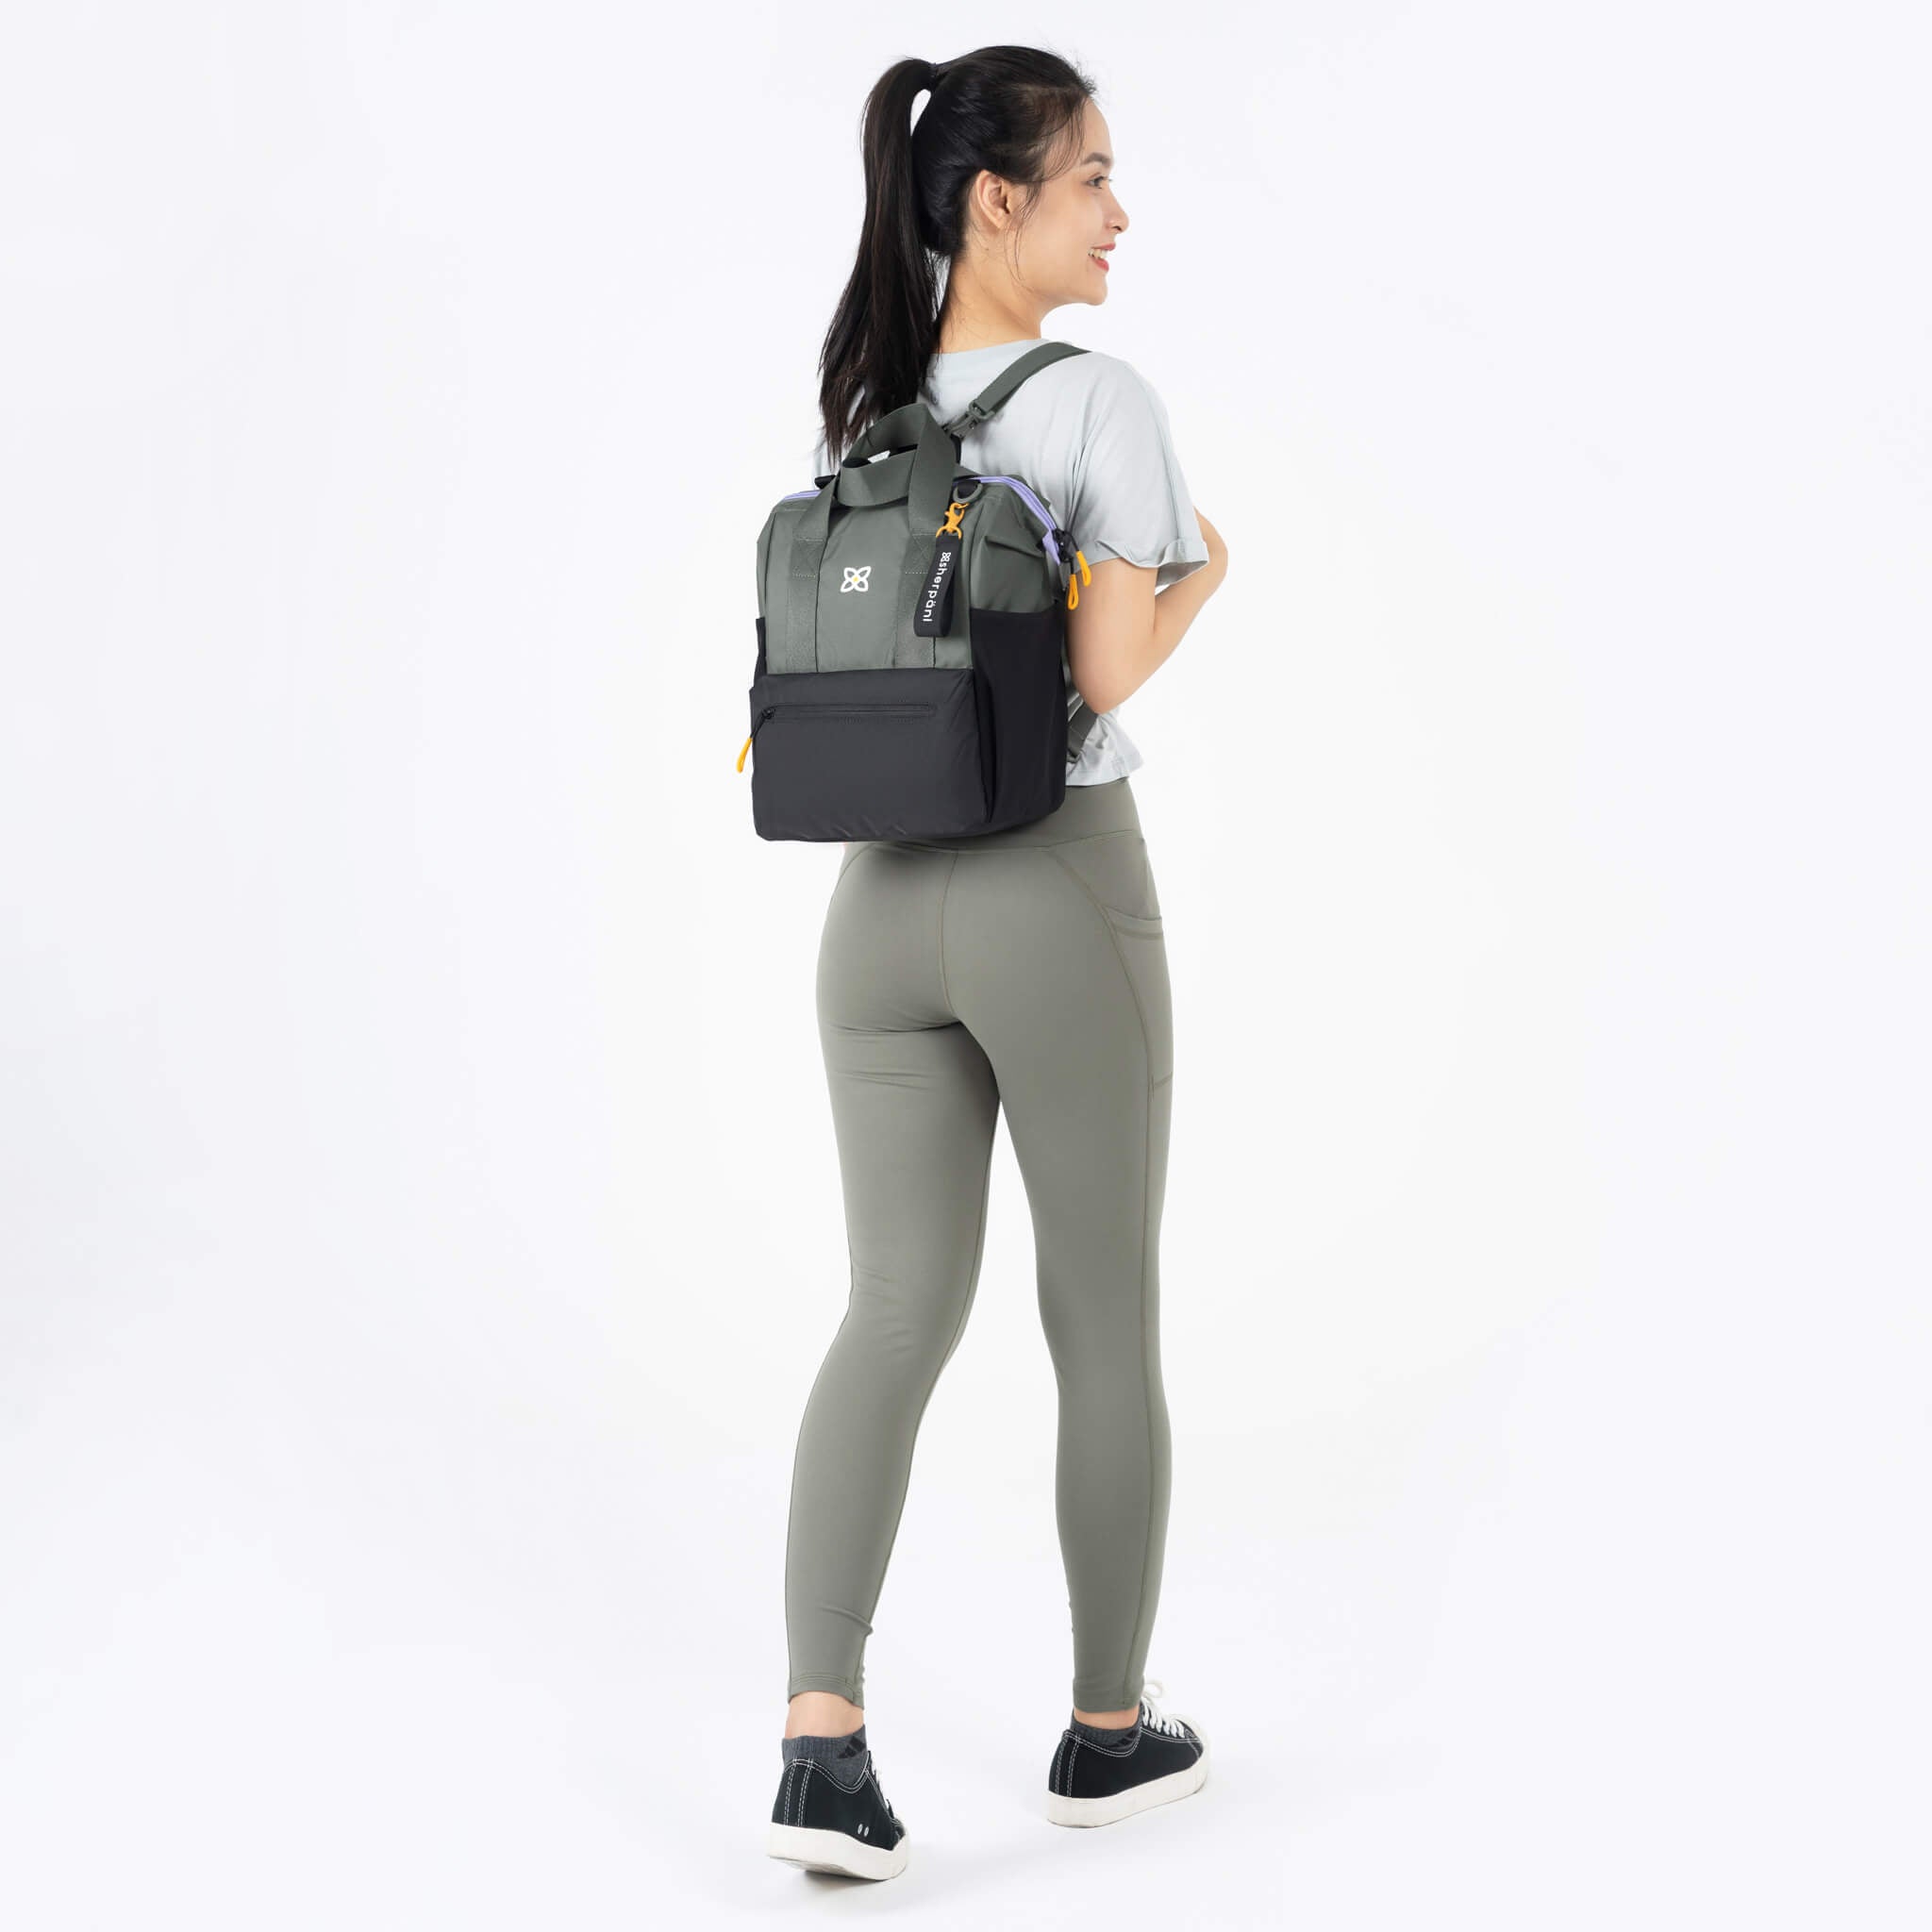 A model showing Sherpani multifunctional travel bag, the Dispatch in Juniper, as a backpack with adjustable and comfortable backpack straps. 